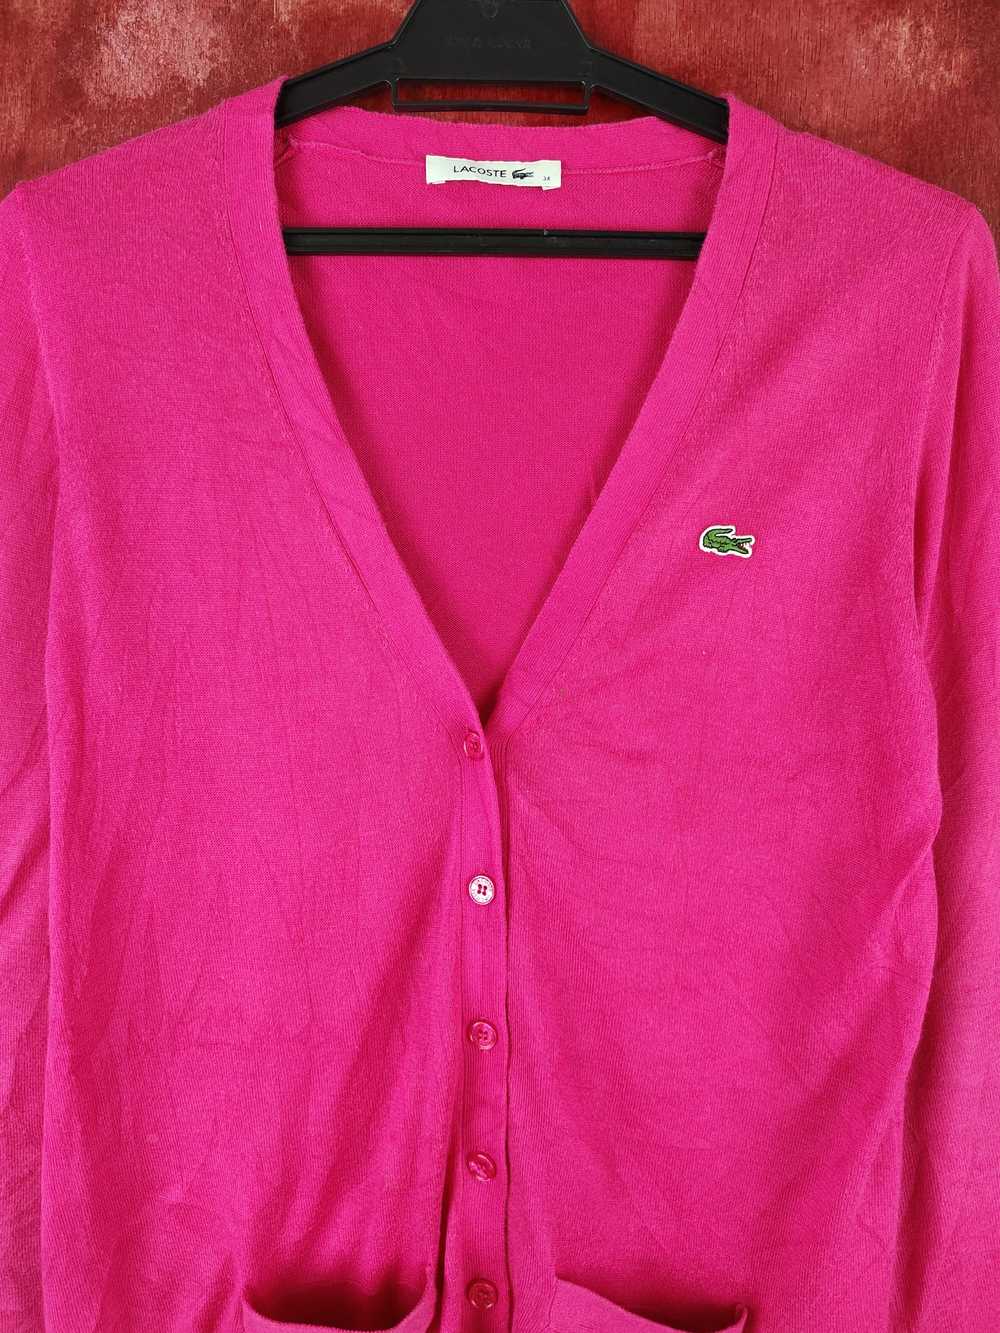 Cardigan × Japanese Brand × Lacoste Lacoste Pink … - image 2